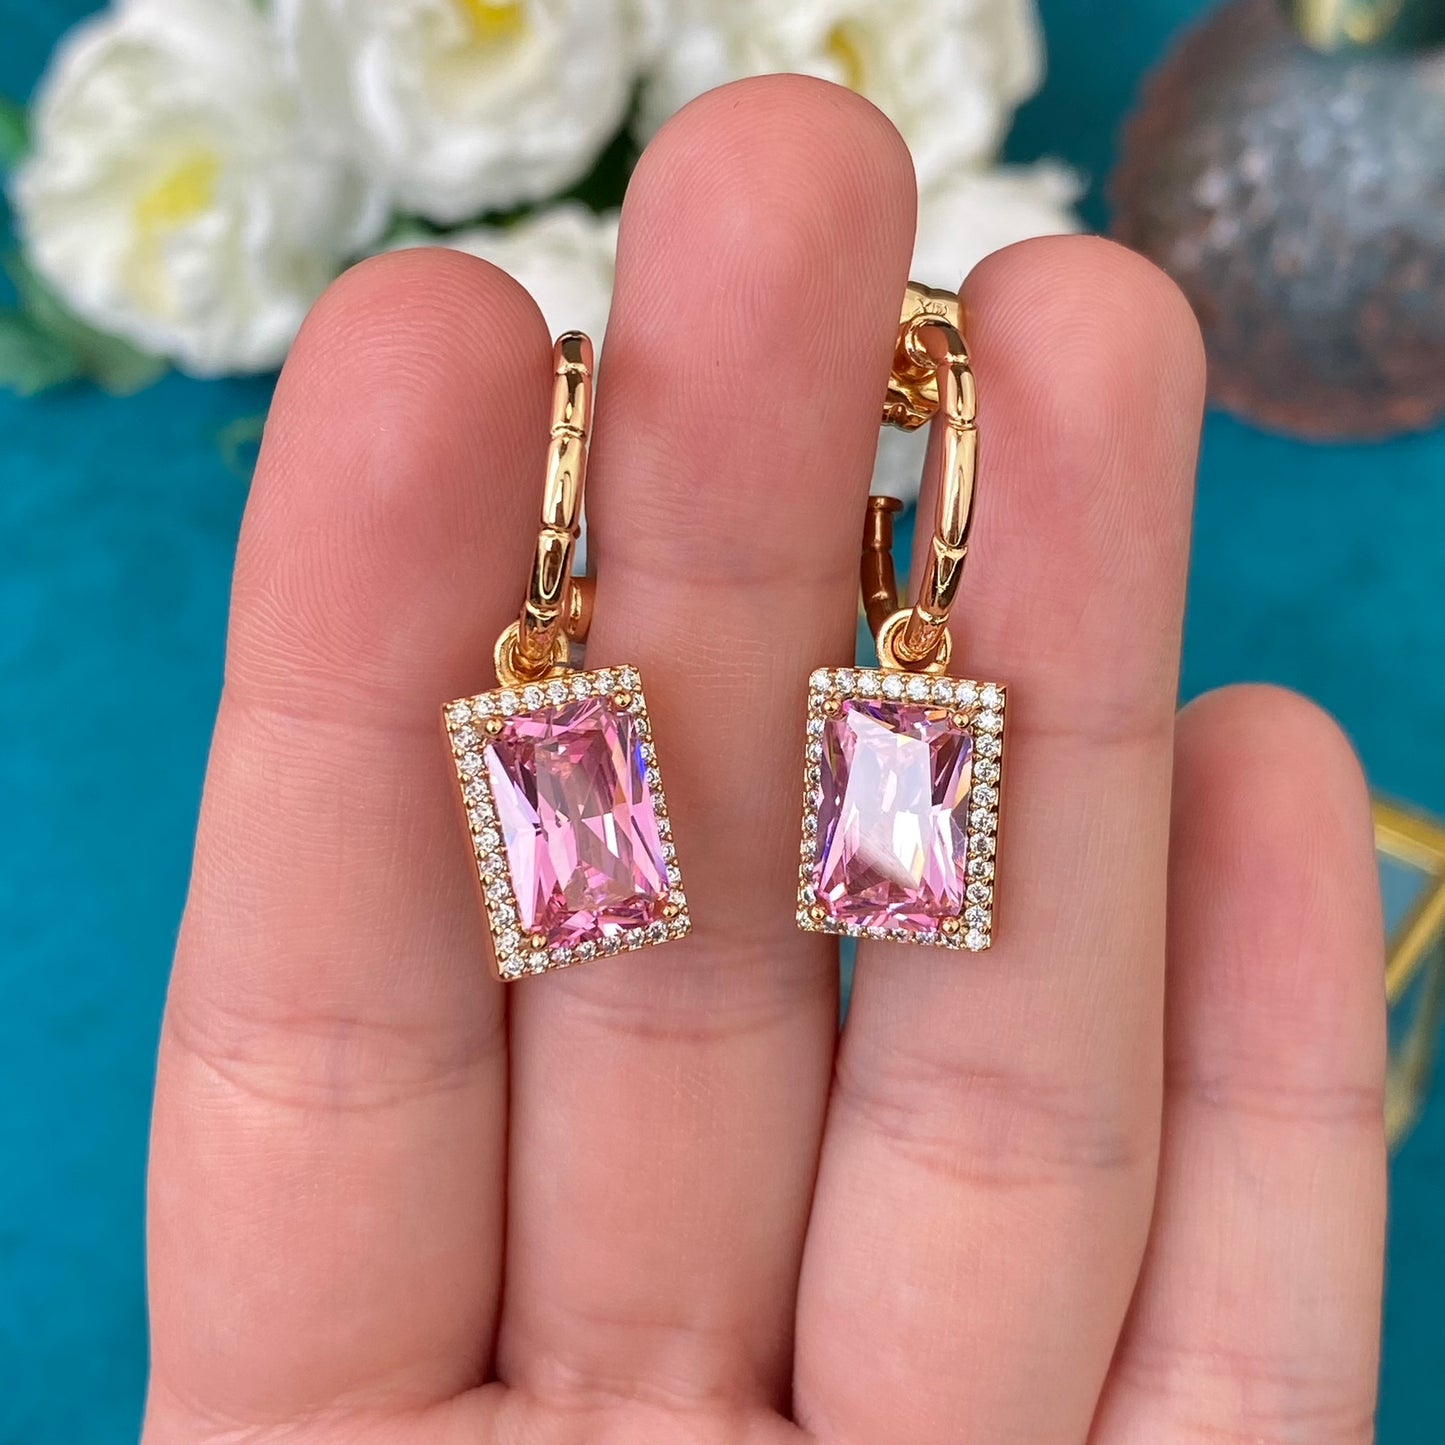 Gold Plated Stainless Steel Earrings with pink decorative crystal